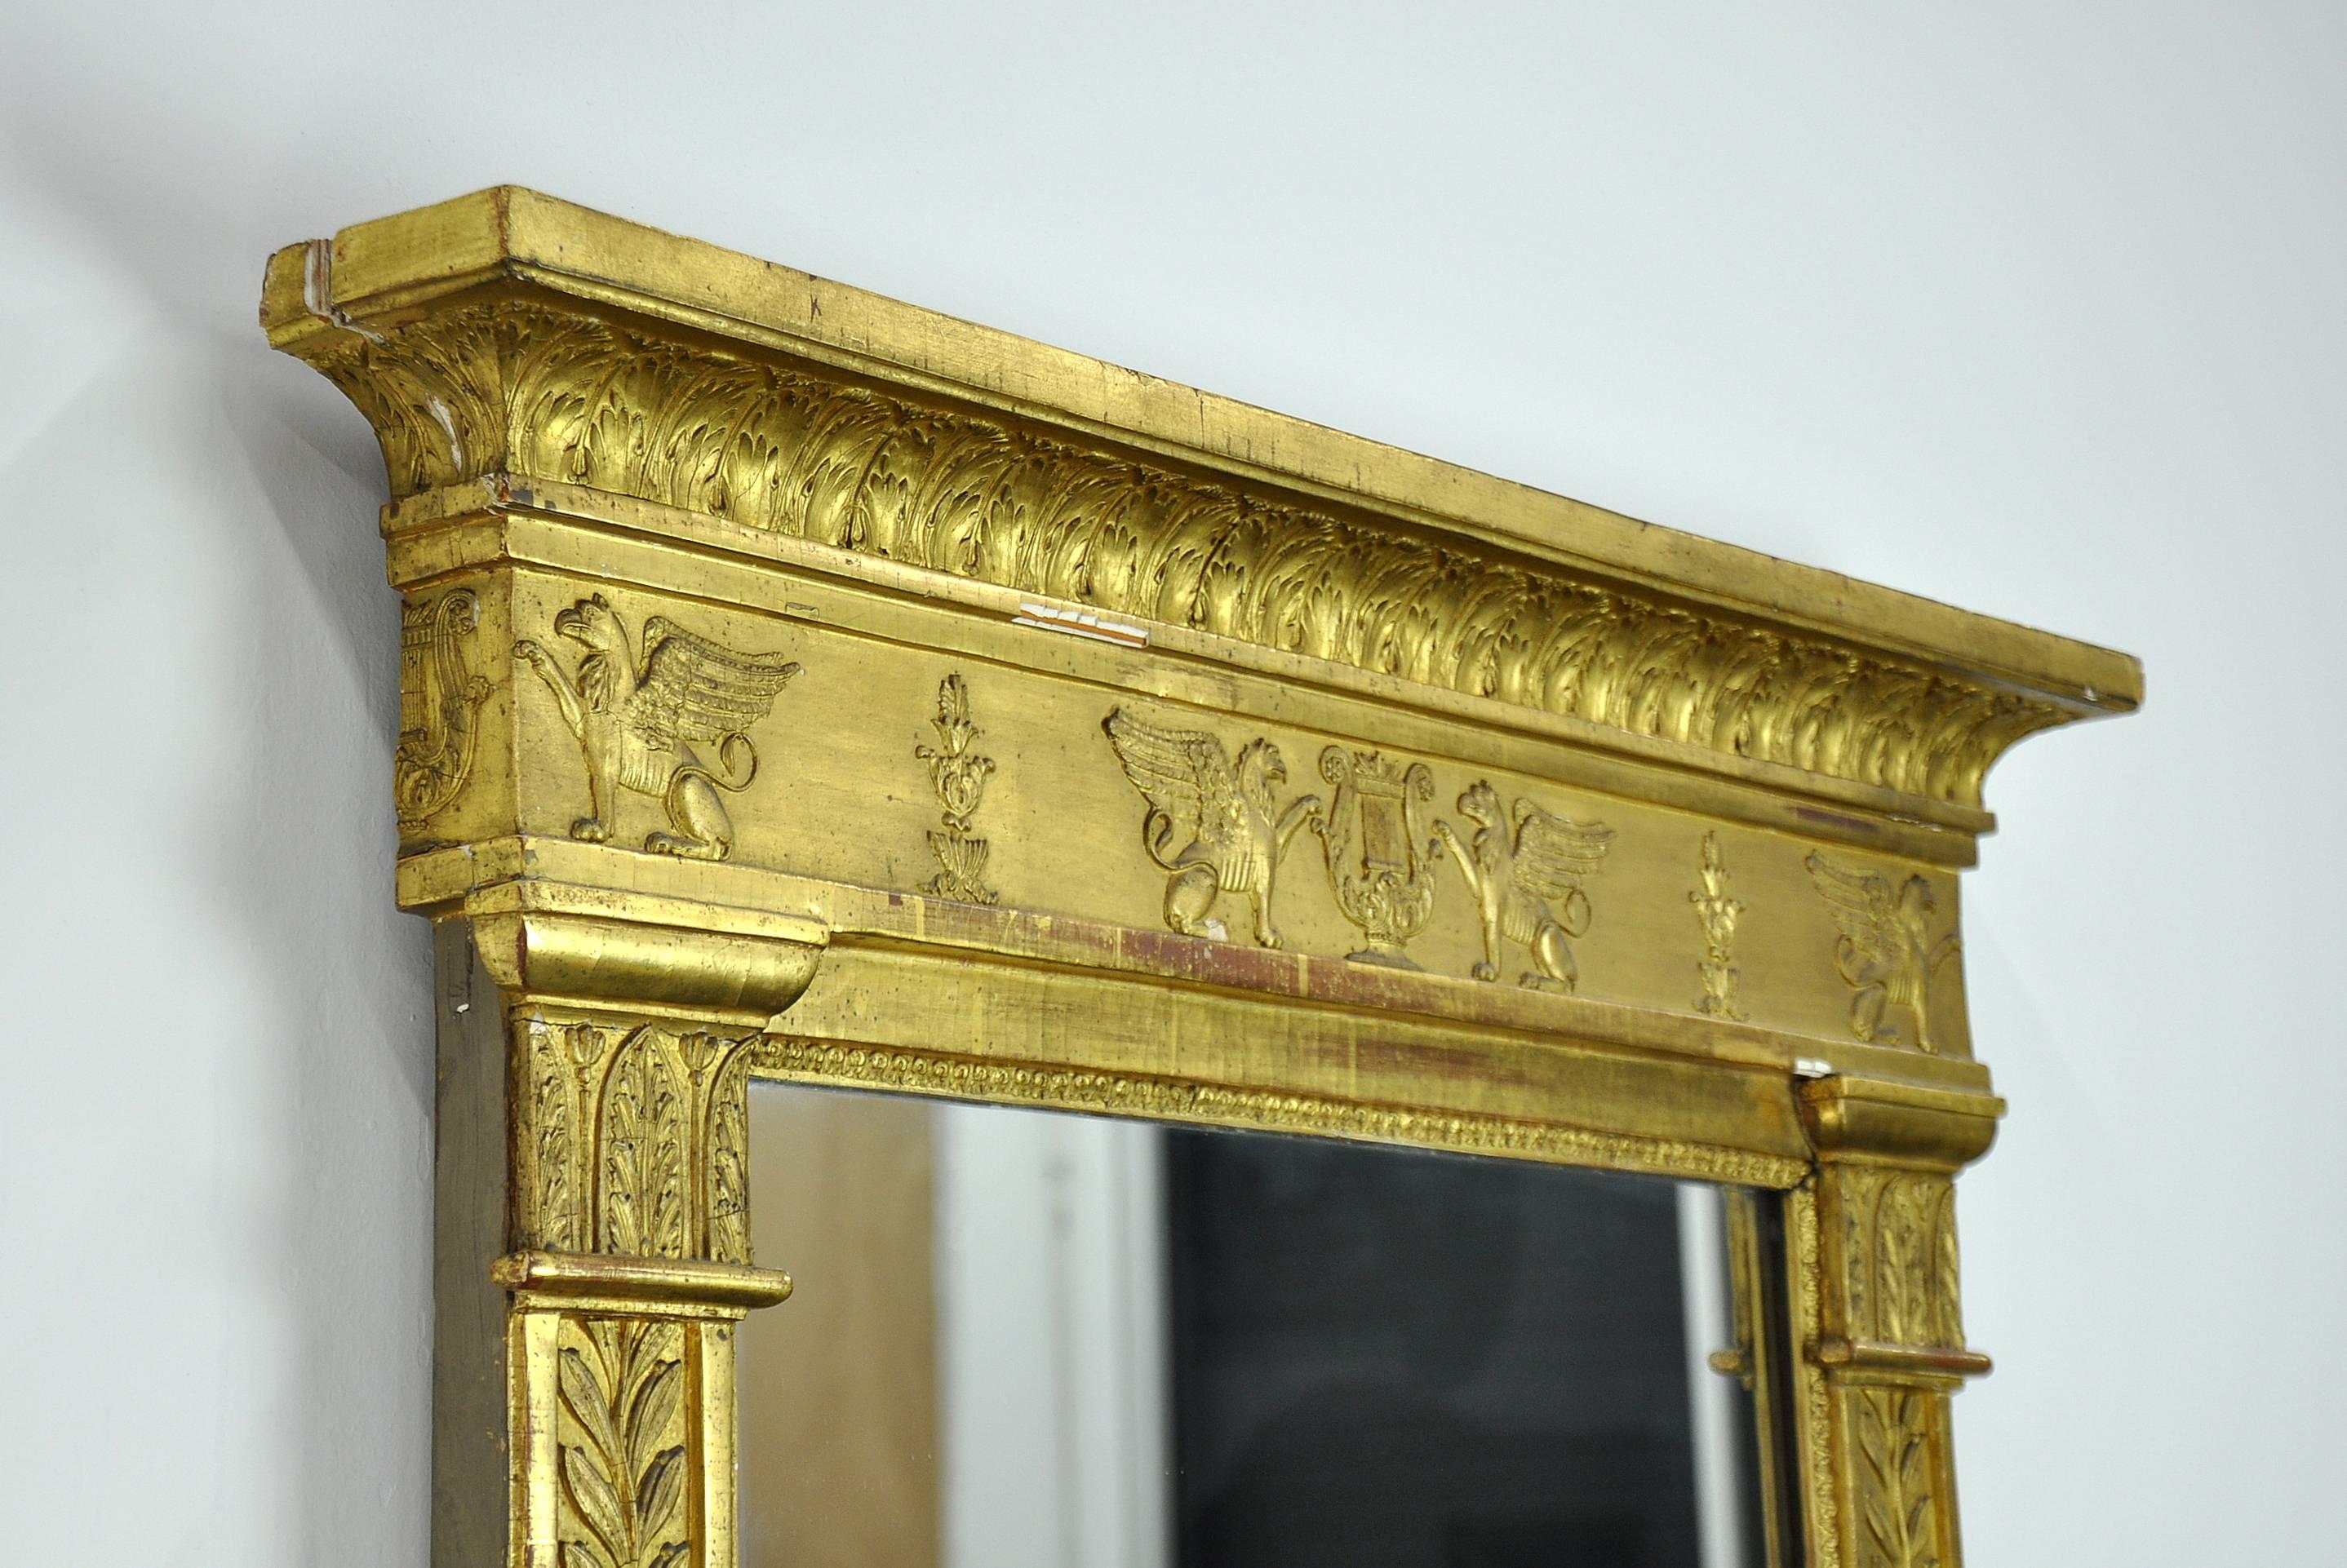 An impressive French First Empire antique gilded trumeau mirror dating from the early 19th century. The giltwood and gessoed wall frame is intricately and abundantly decorated with winged griffins, amphoras, acanthus and olive leaves, lyres and